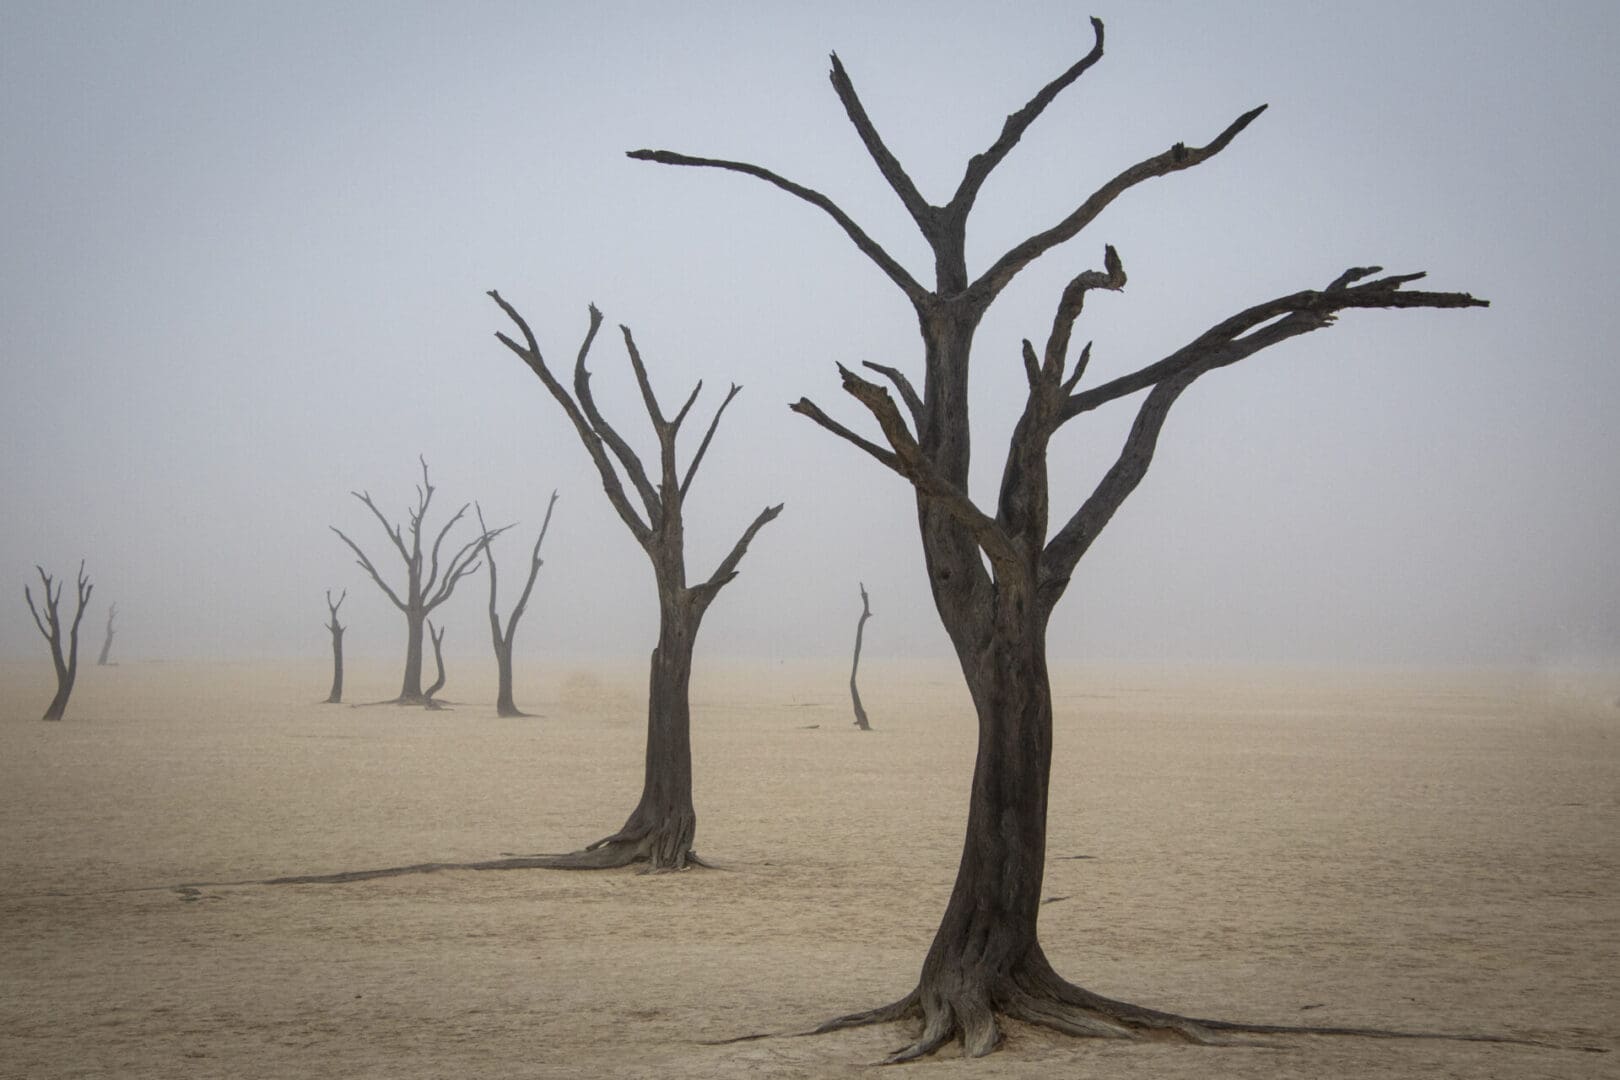 Dead trees in a desert on a foggy day.